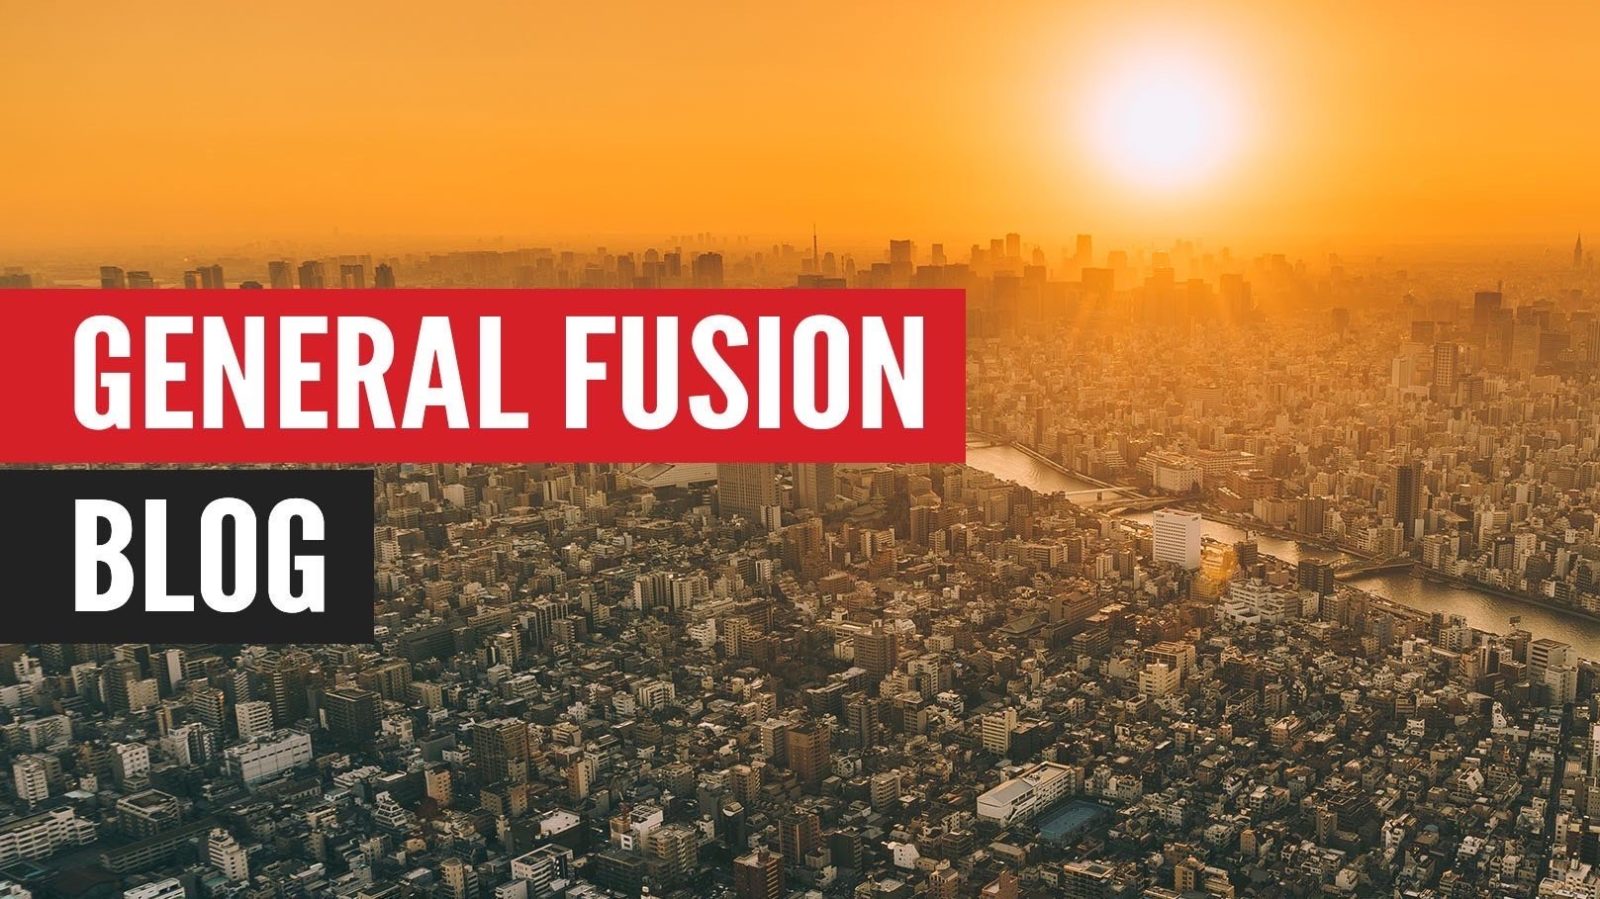 Sustainability: Viewing fusion through a wider lens